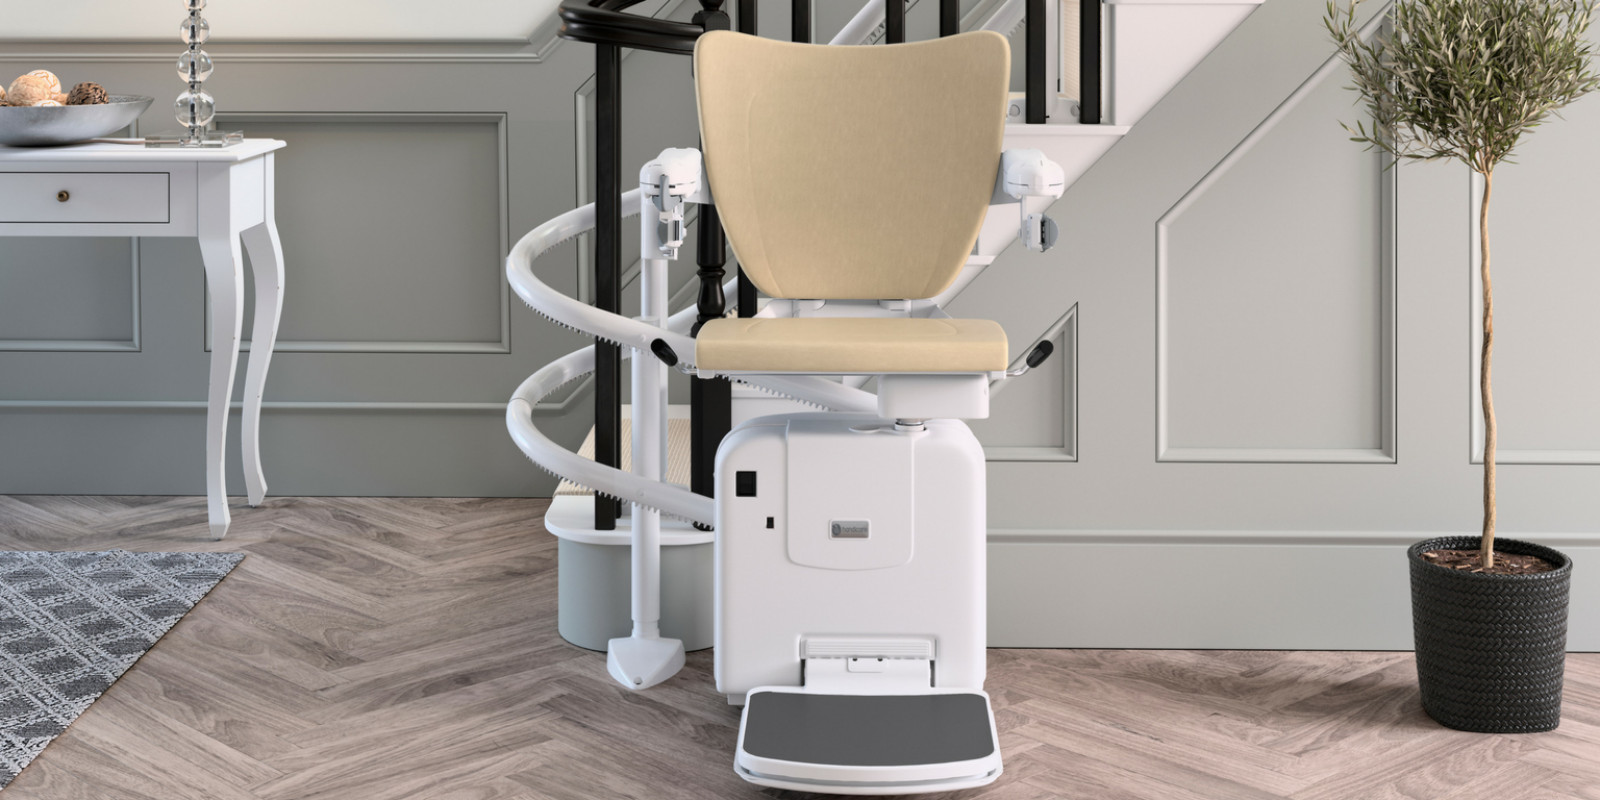 HANDICARE APPOINTS COMMERCIAL LEAD FOR STAIRLIFTS...